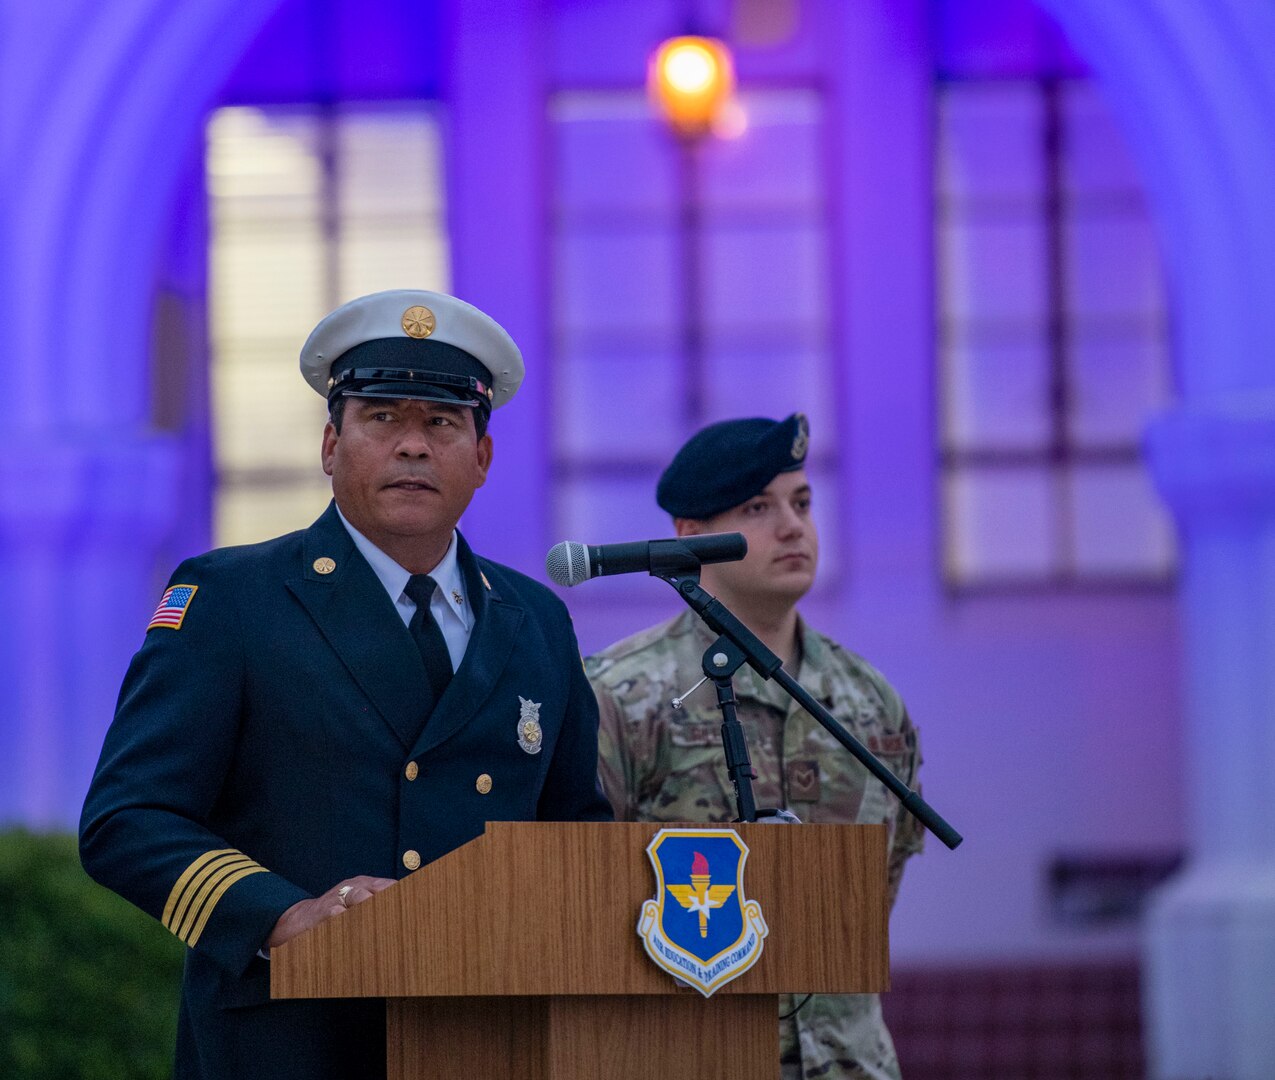 Deputy Fire Chief Michael Guzman, Joint Base San Antonio-Lackland, speaks during a 9/11 remembrance ceremony Sept. 11 at Joint Base San Antonio-Randolph. The event honored those who lost their lives in New York City, Washington D.C. and Pennsylvania during terrorist attacks 18 years ago.